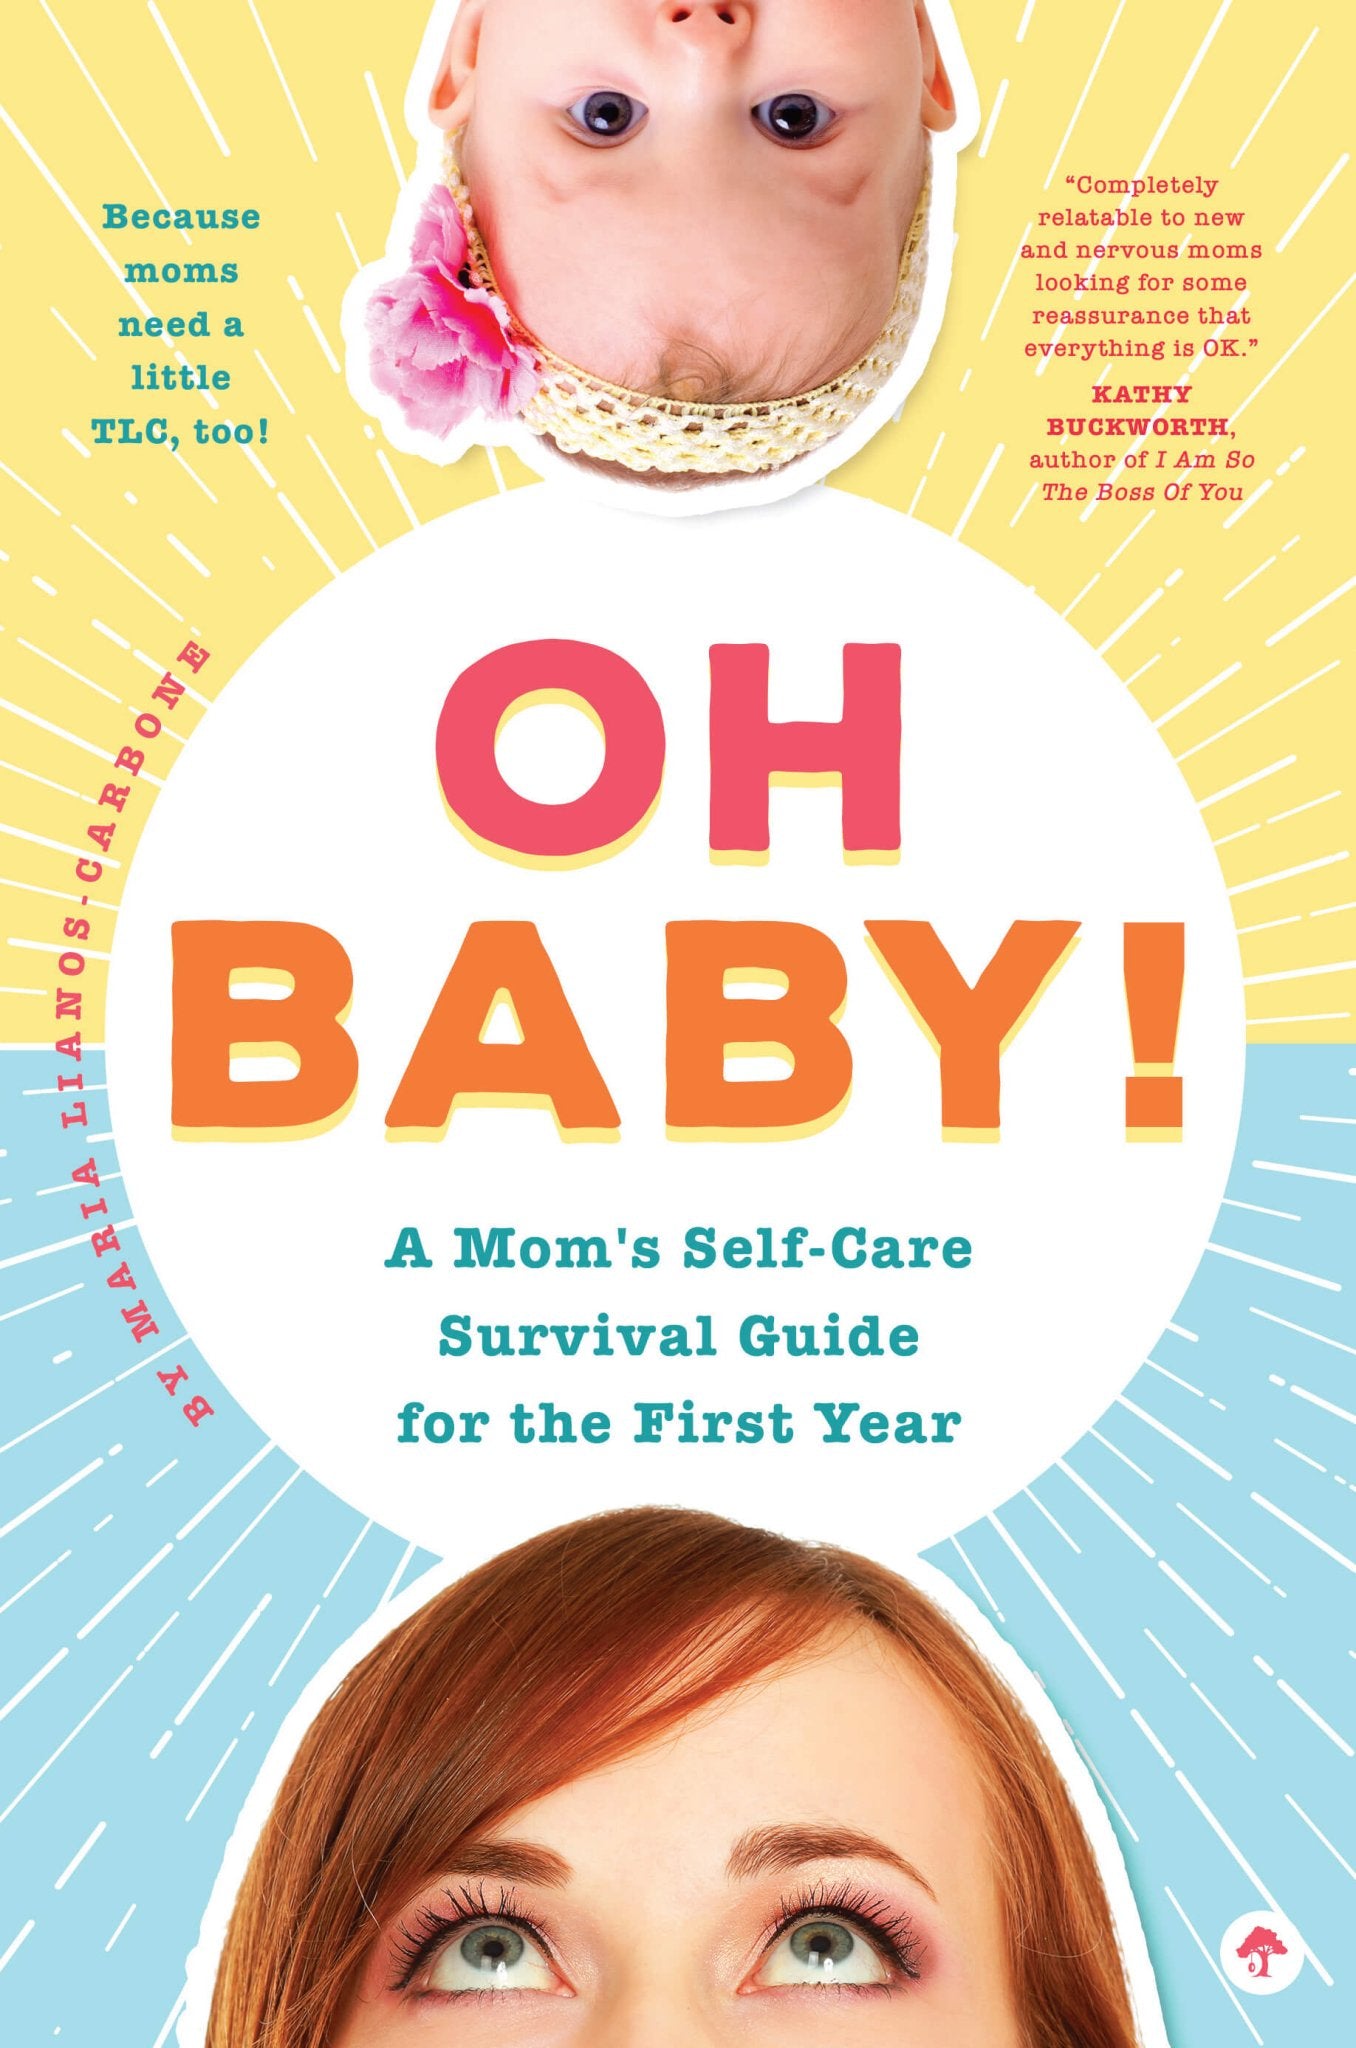 Oh Baby! A Mom's Self-Care Survival Guide for the First Year - SuperMom Headquarters